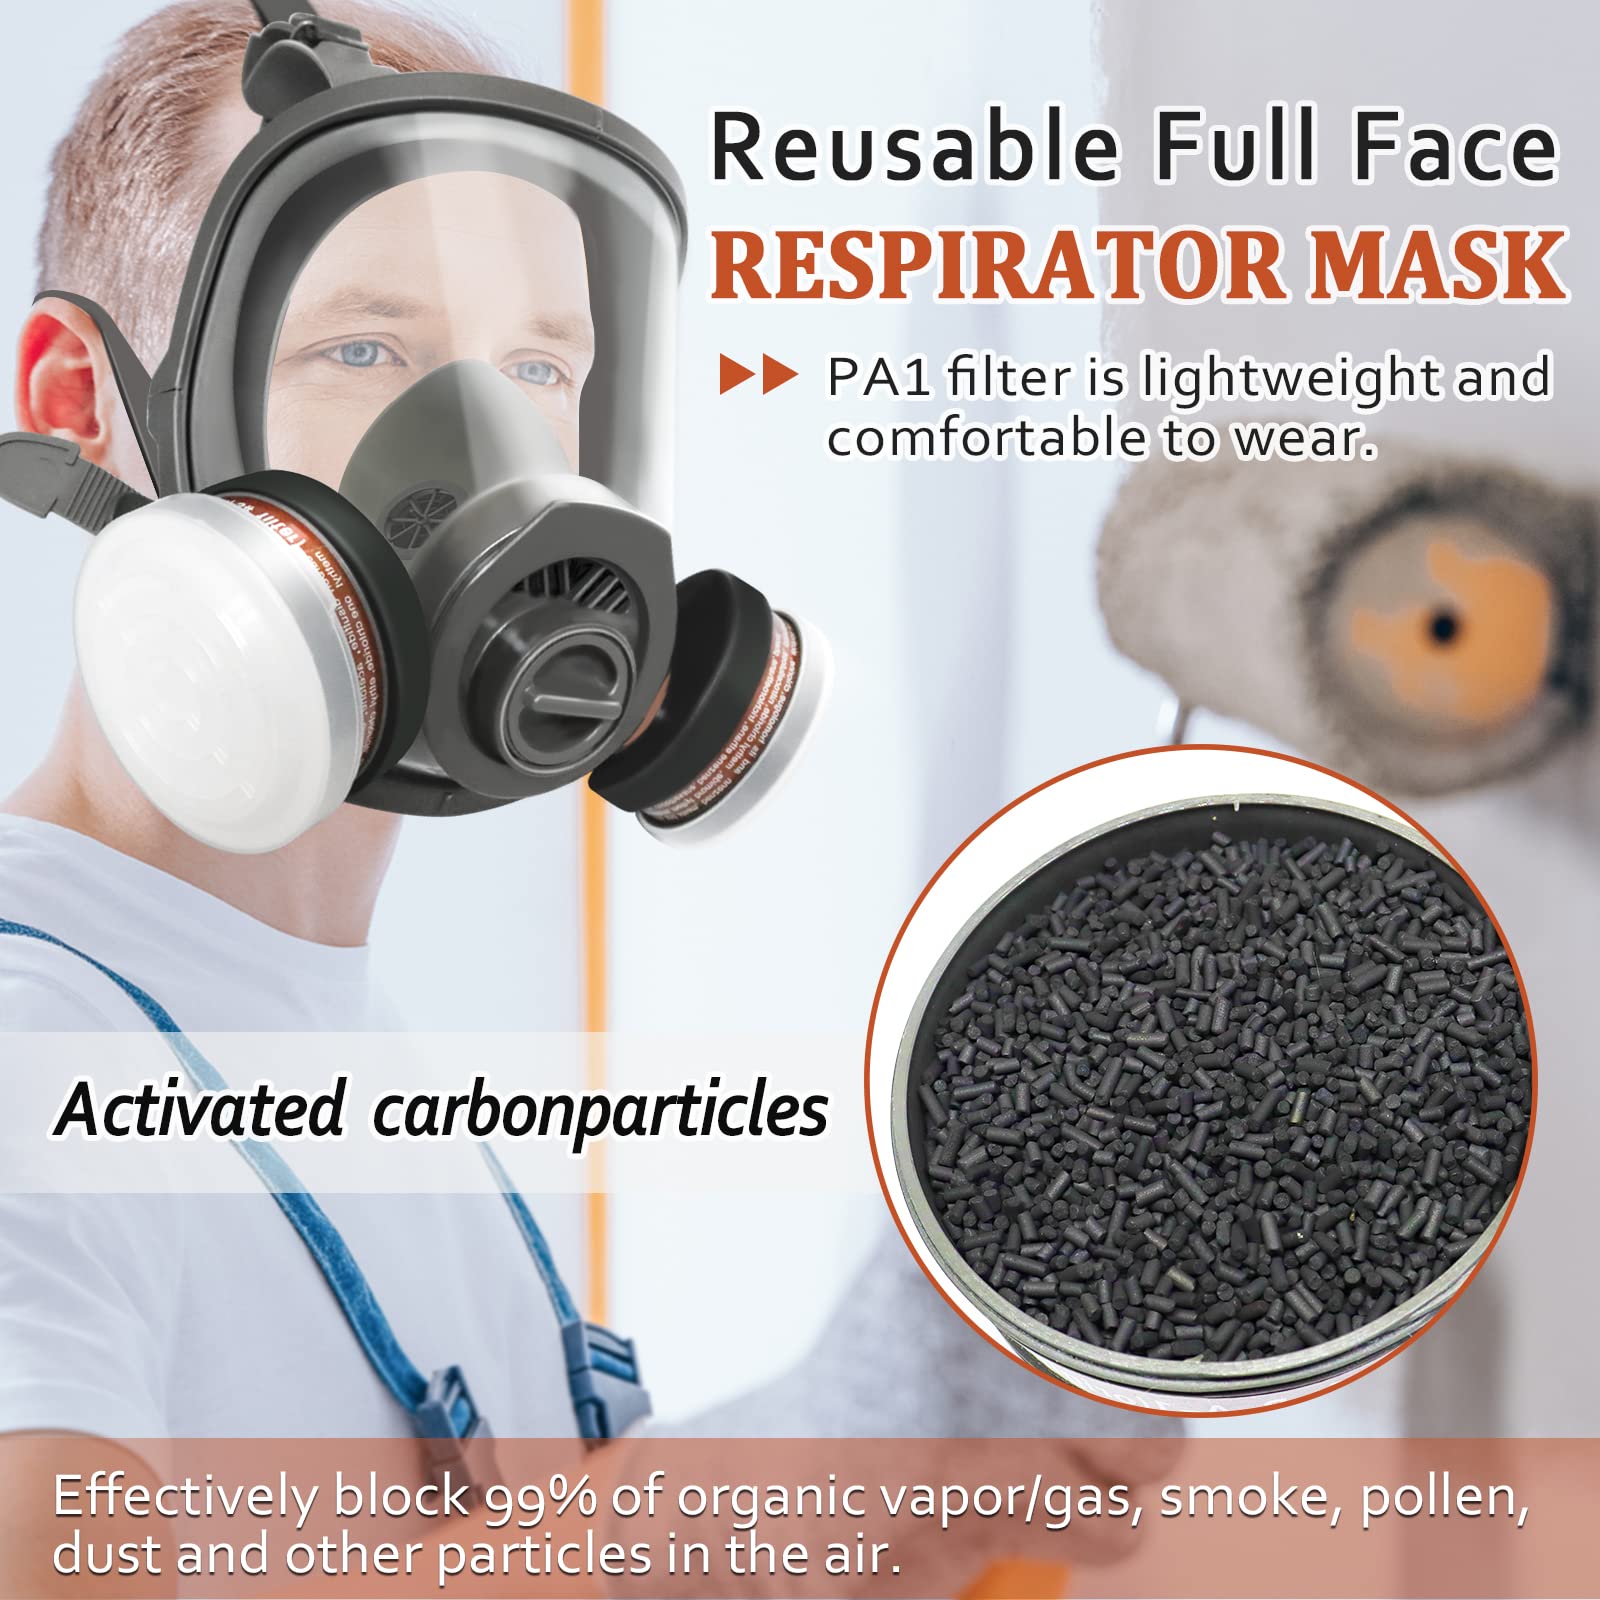 XINBTK Reusable Full Face Respirator Mask - with P-A-1 Organic Vapor Cartridge, Gas Mask with 10 PCS Particulate Filter Cottons, Widely Used in Organic Gas, Paint Spary, Chemical, Woodworking